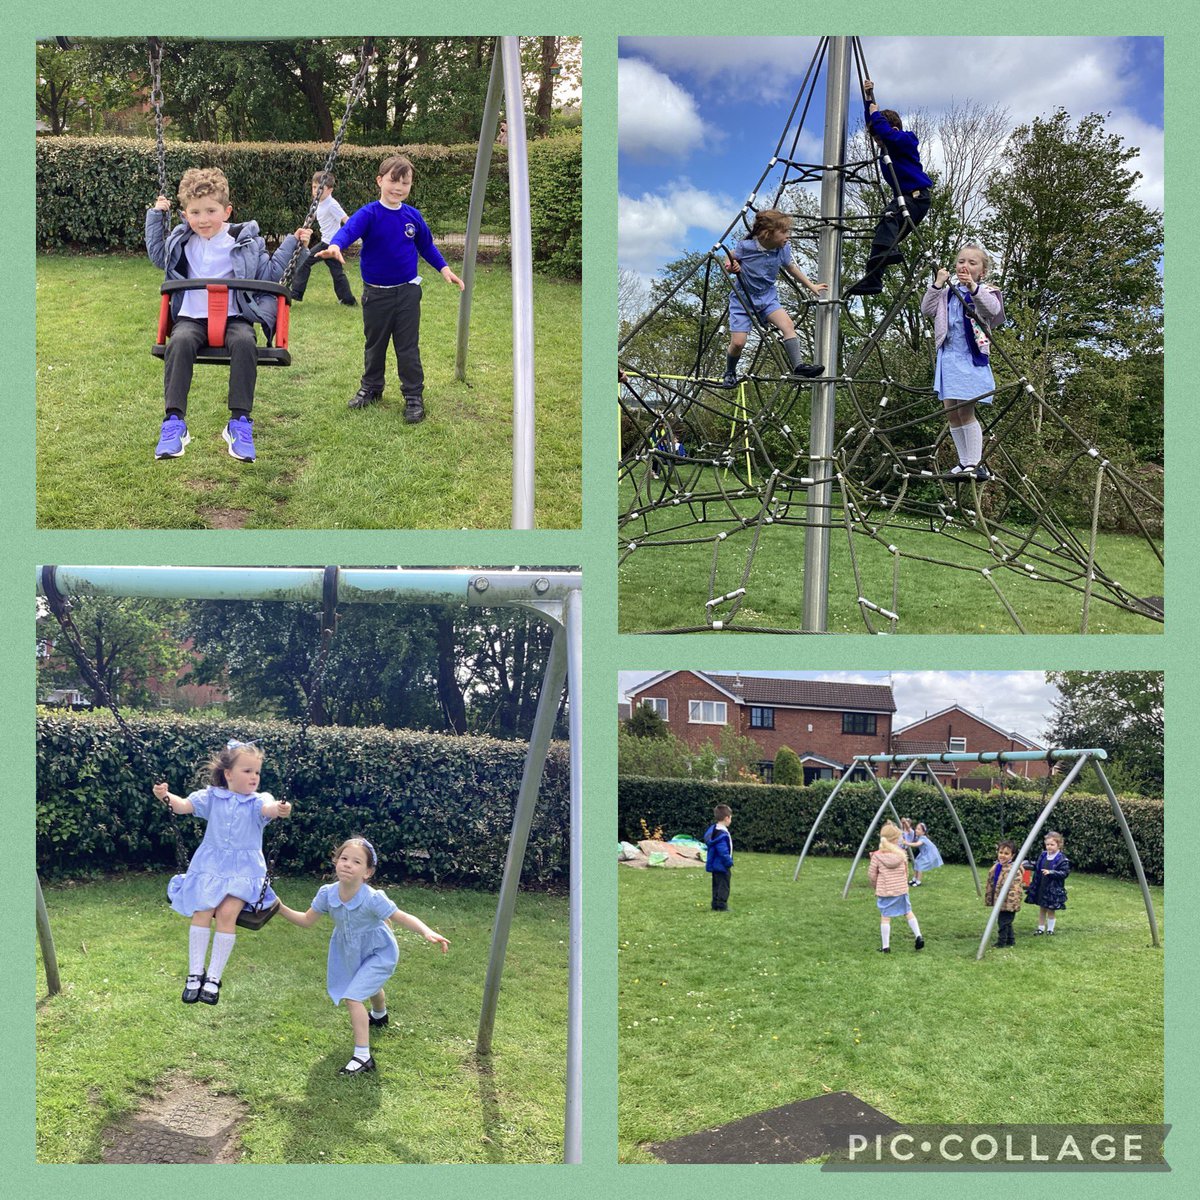 Team resilience had a wonderful time at the park for winning the most team points! #reception #year1 #year12 #year2